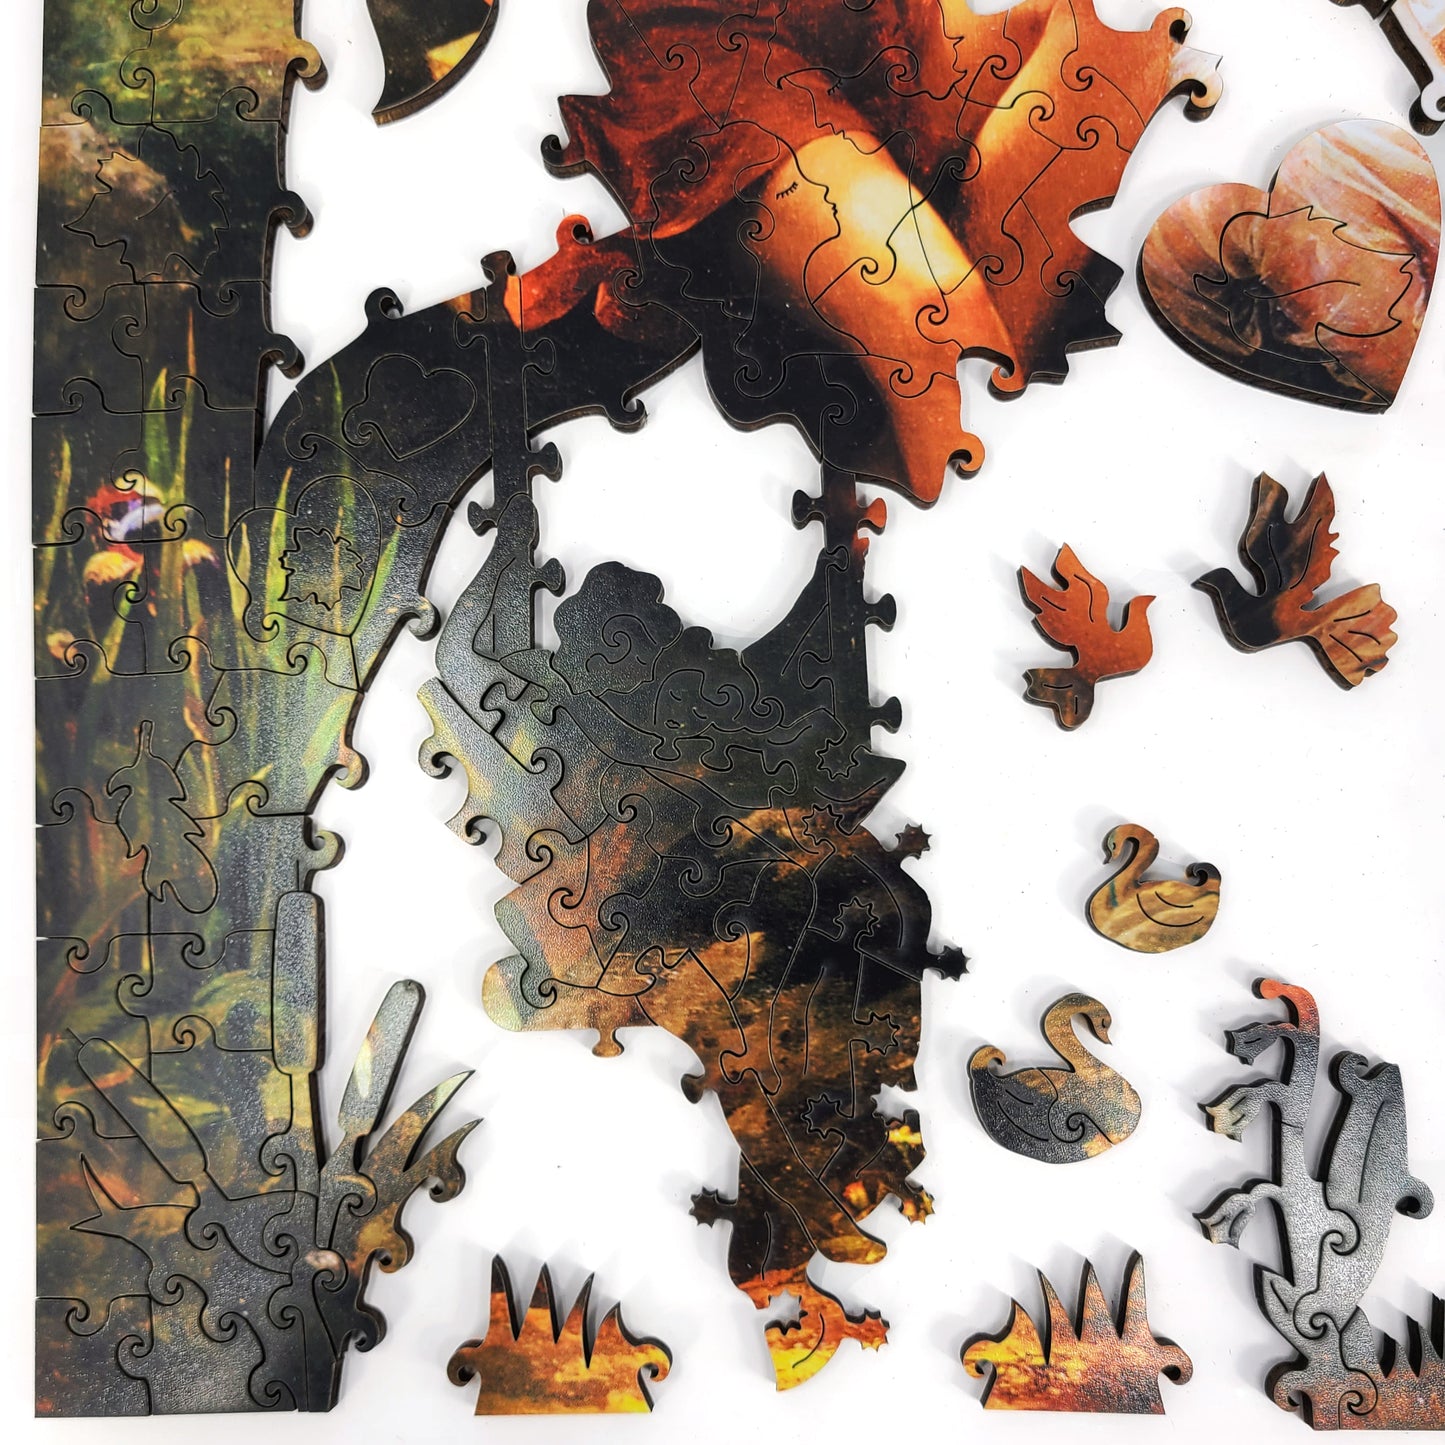 Wooden Jigsaw Puzzle with Uniquely Shaped Pieces for Adults - 350 Pieces - Springtime